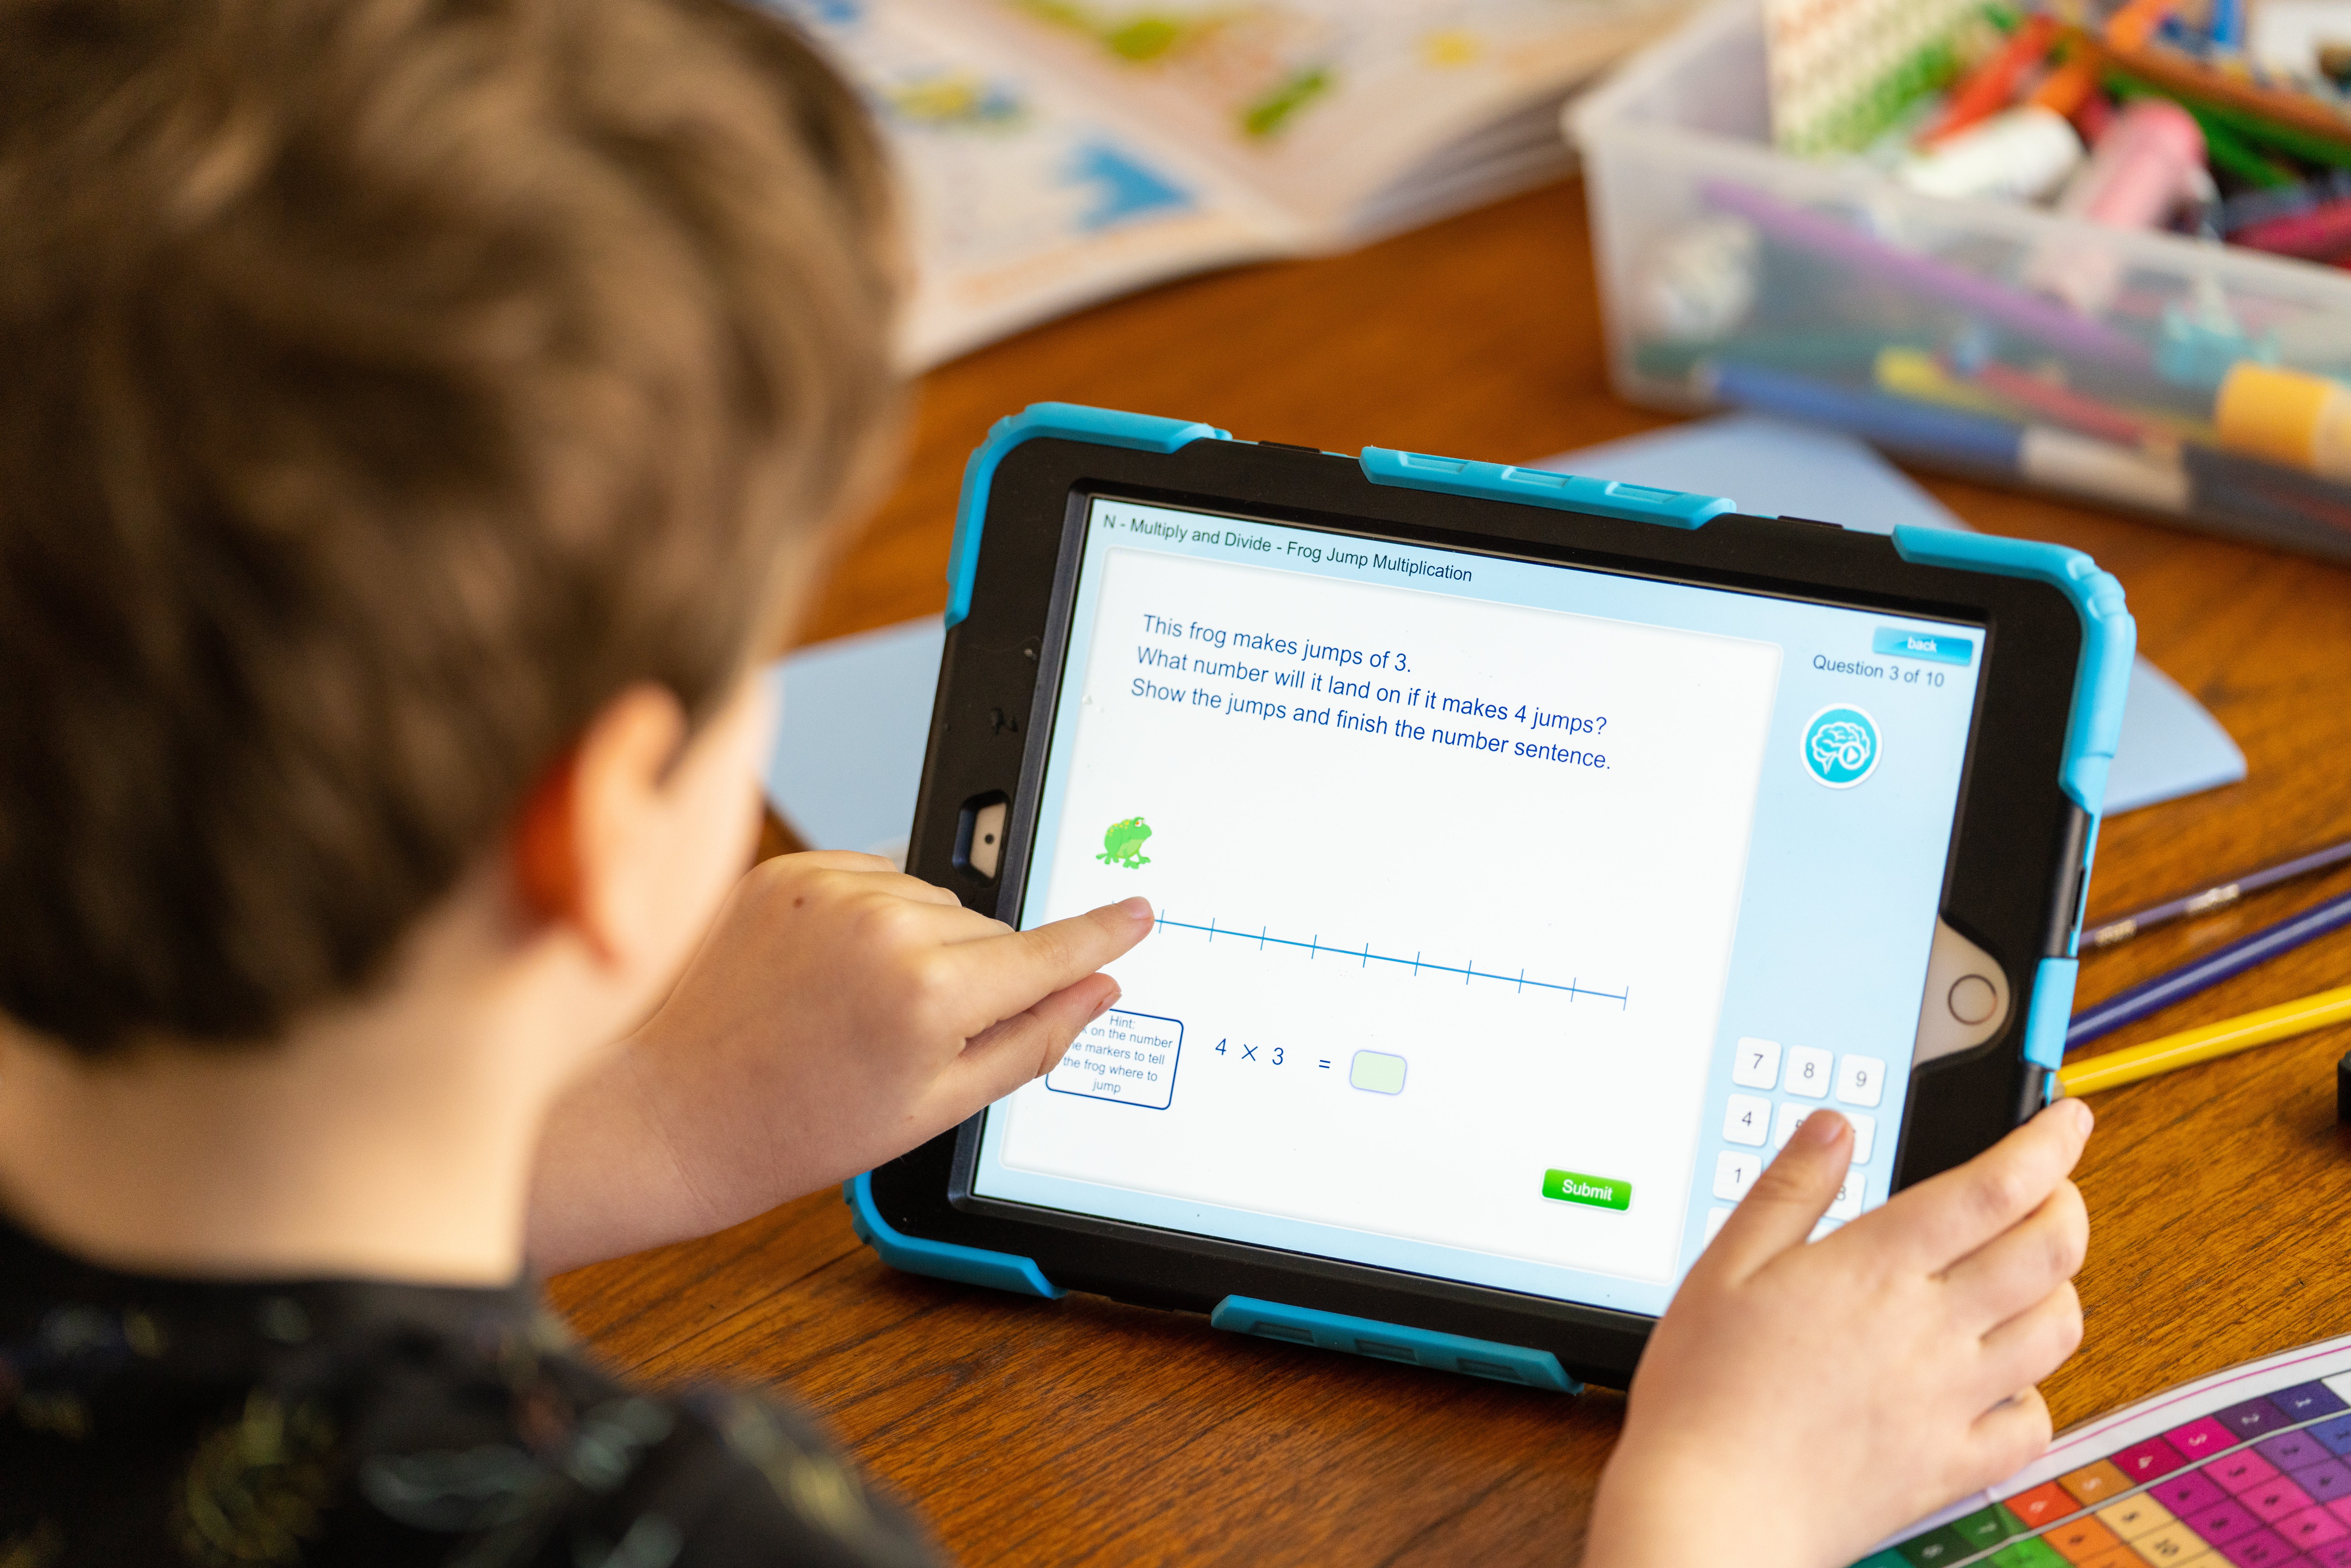 Wilfred, aged 7, does maths activities on an iPad as he takes part in home schooling (PA)